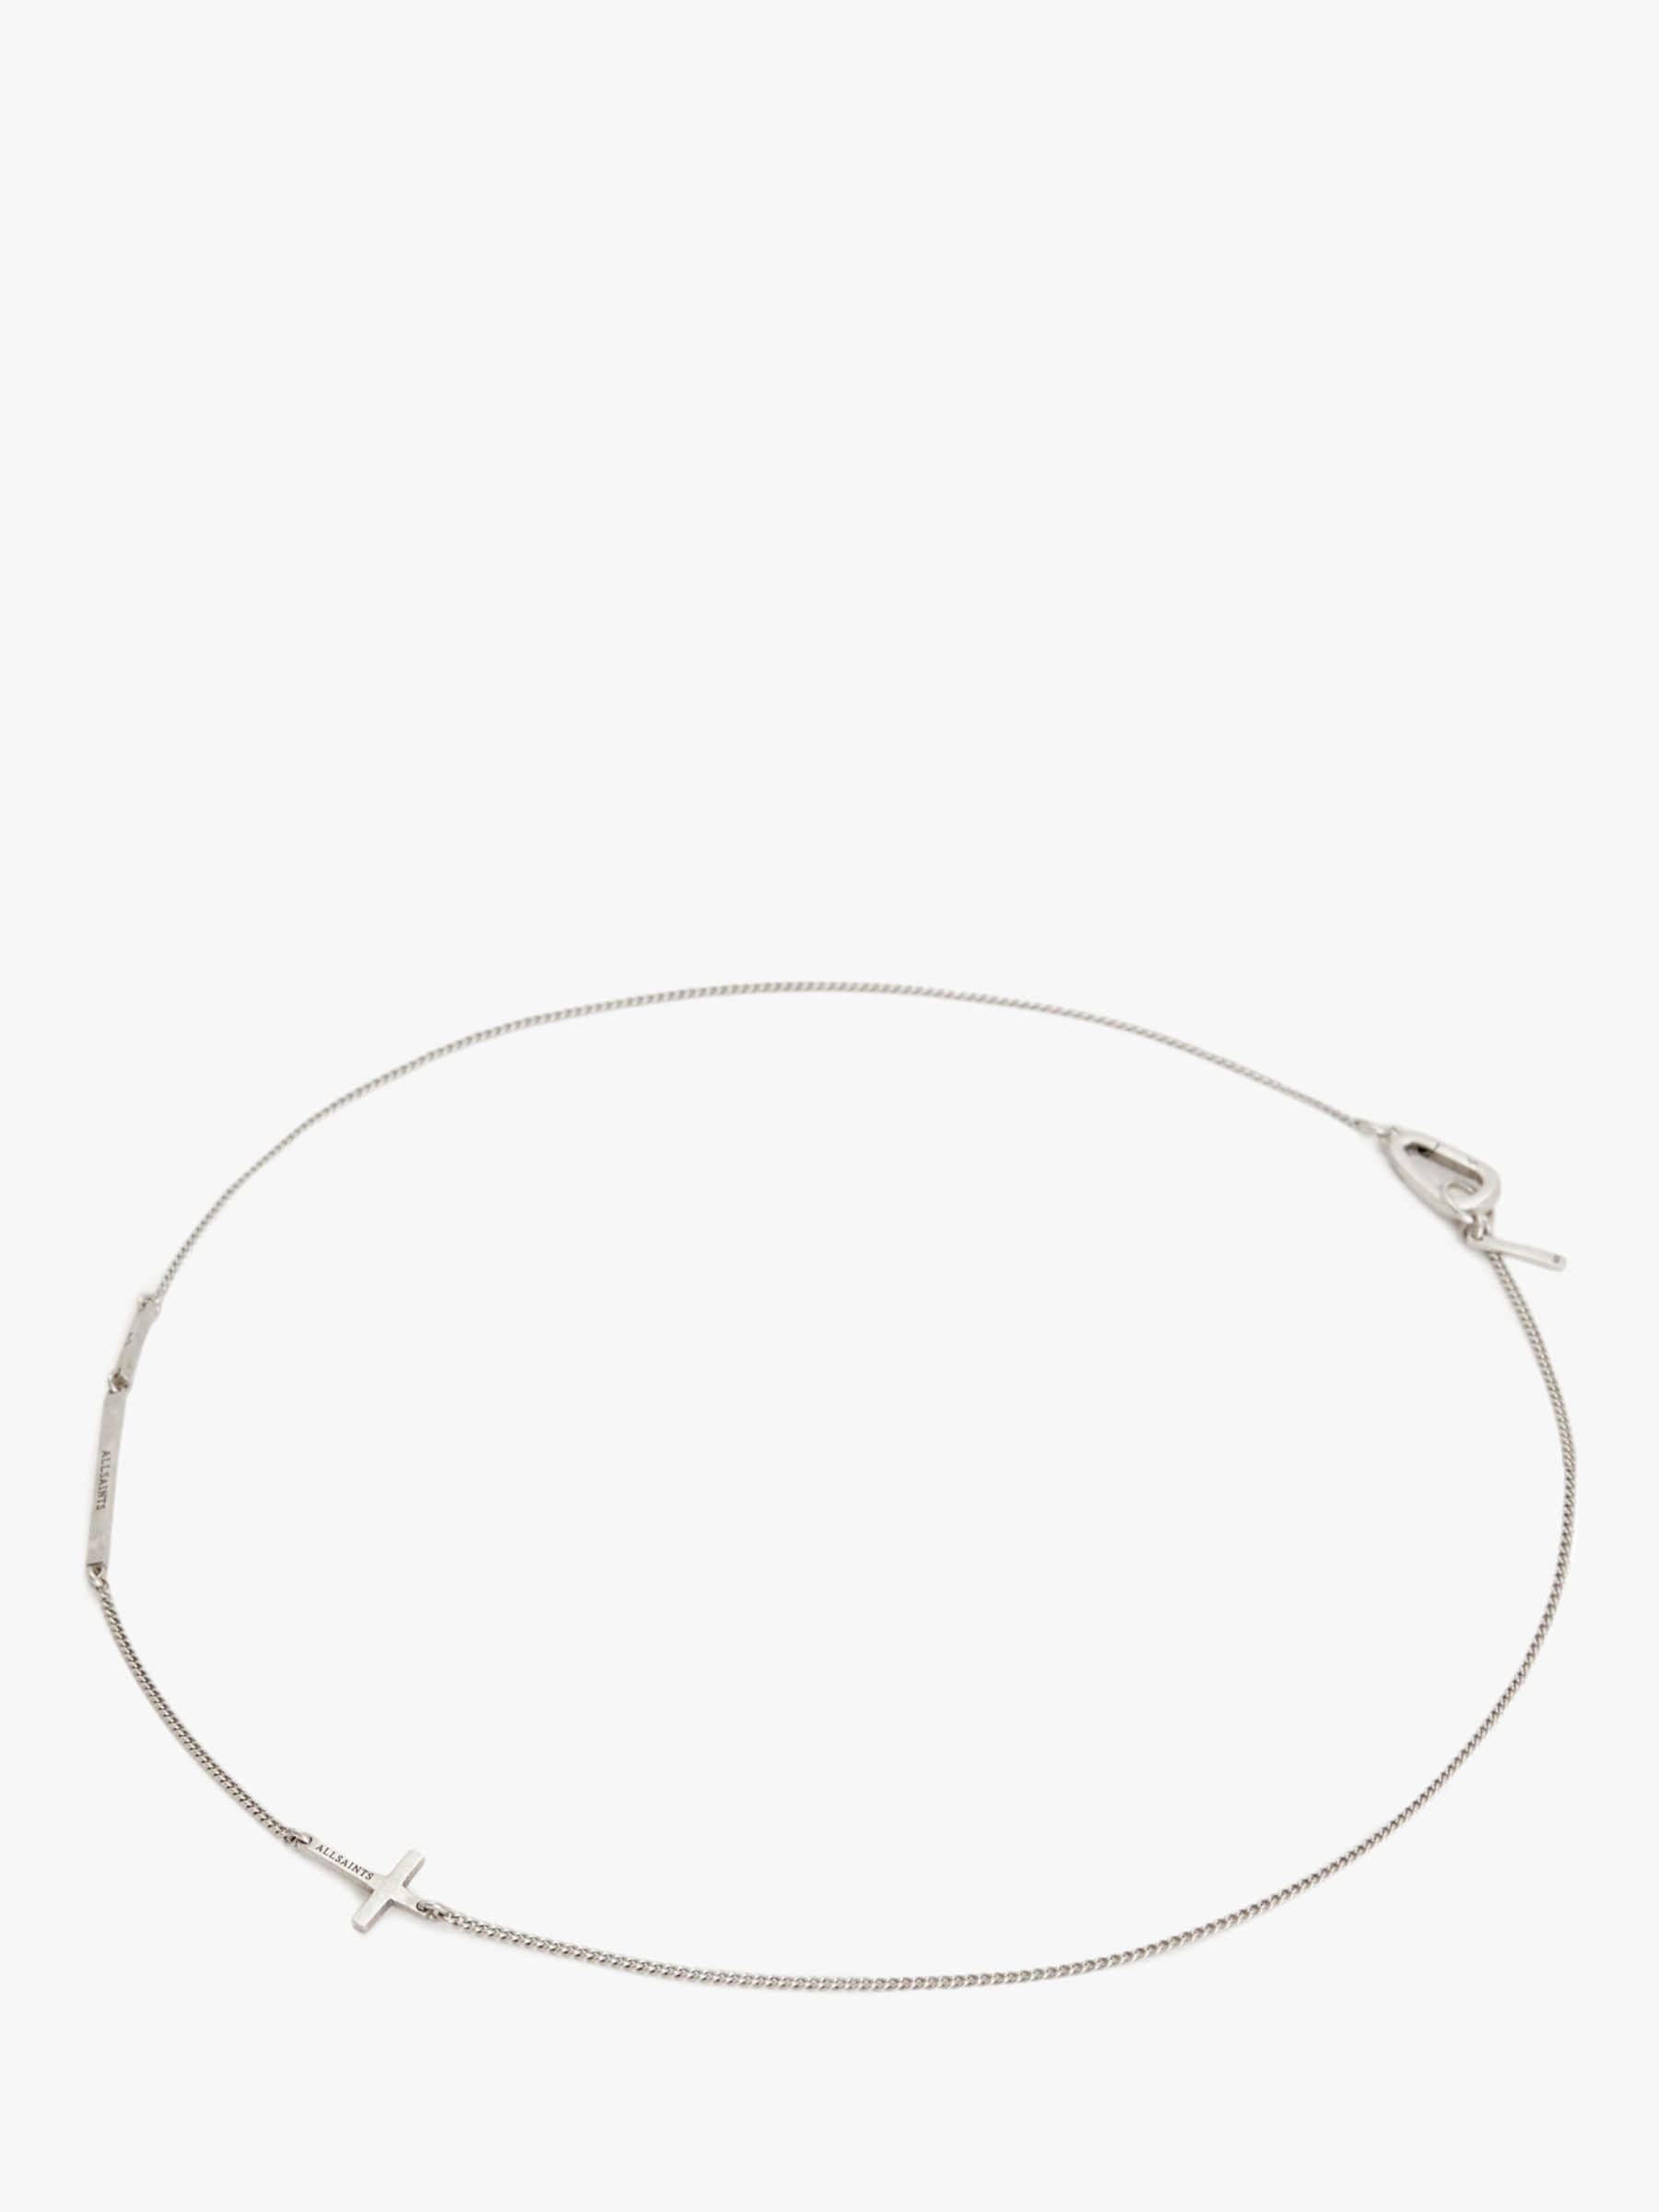 Buy AllSaints Cross Curb Chain Carabiner Clasp Necklace, Warm Silver Online at johnlewis.com